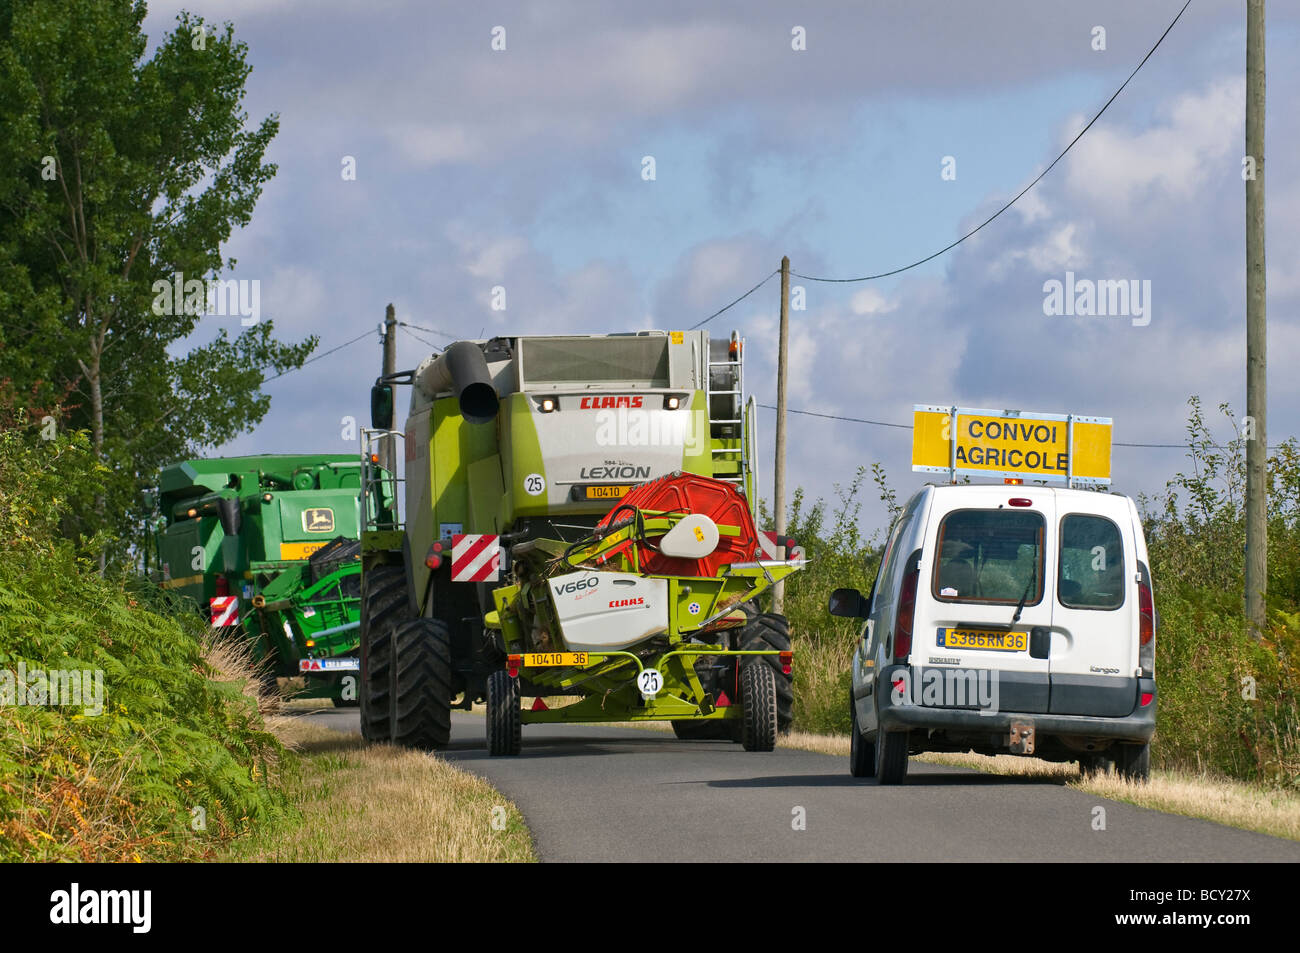 Claas and John Deere combine harvesters in convoy blocking public road, sud-Touraine, France. Stock Photo